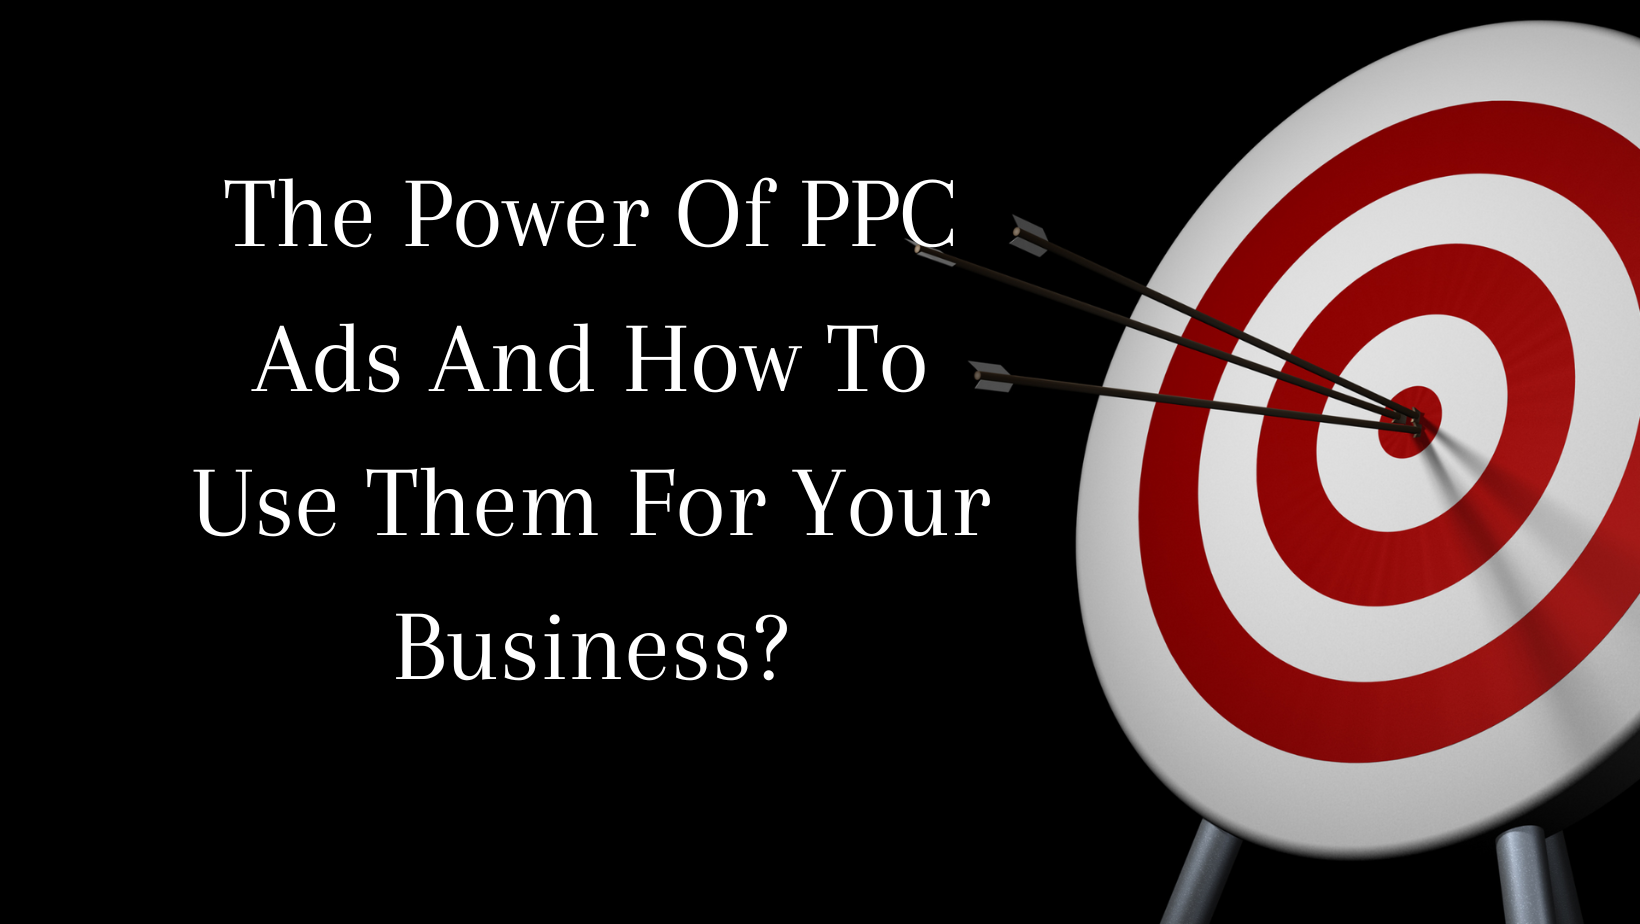 The Power Of PPC Ads And How To Use Them For Your Business